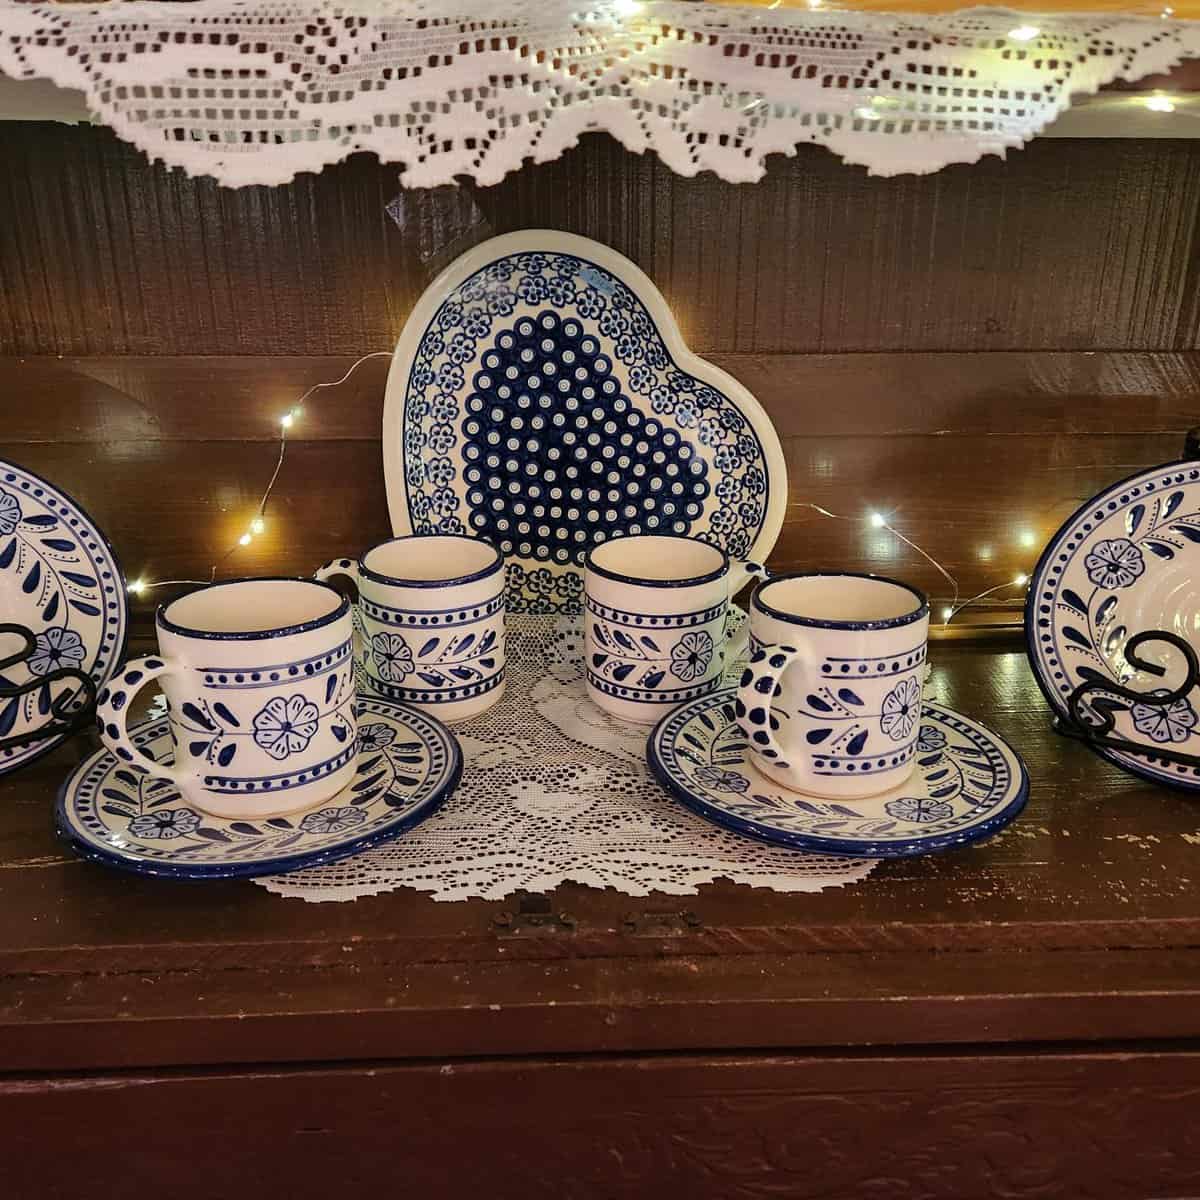 Blue and white ceramic tea set on lace tablecloth.